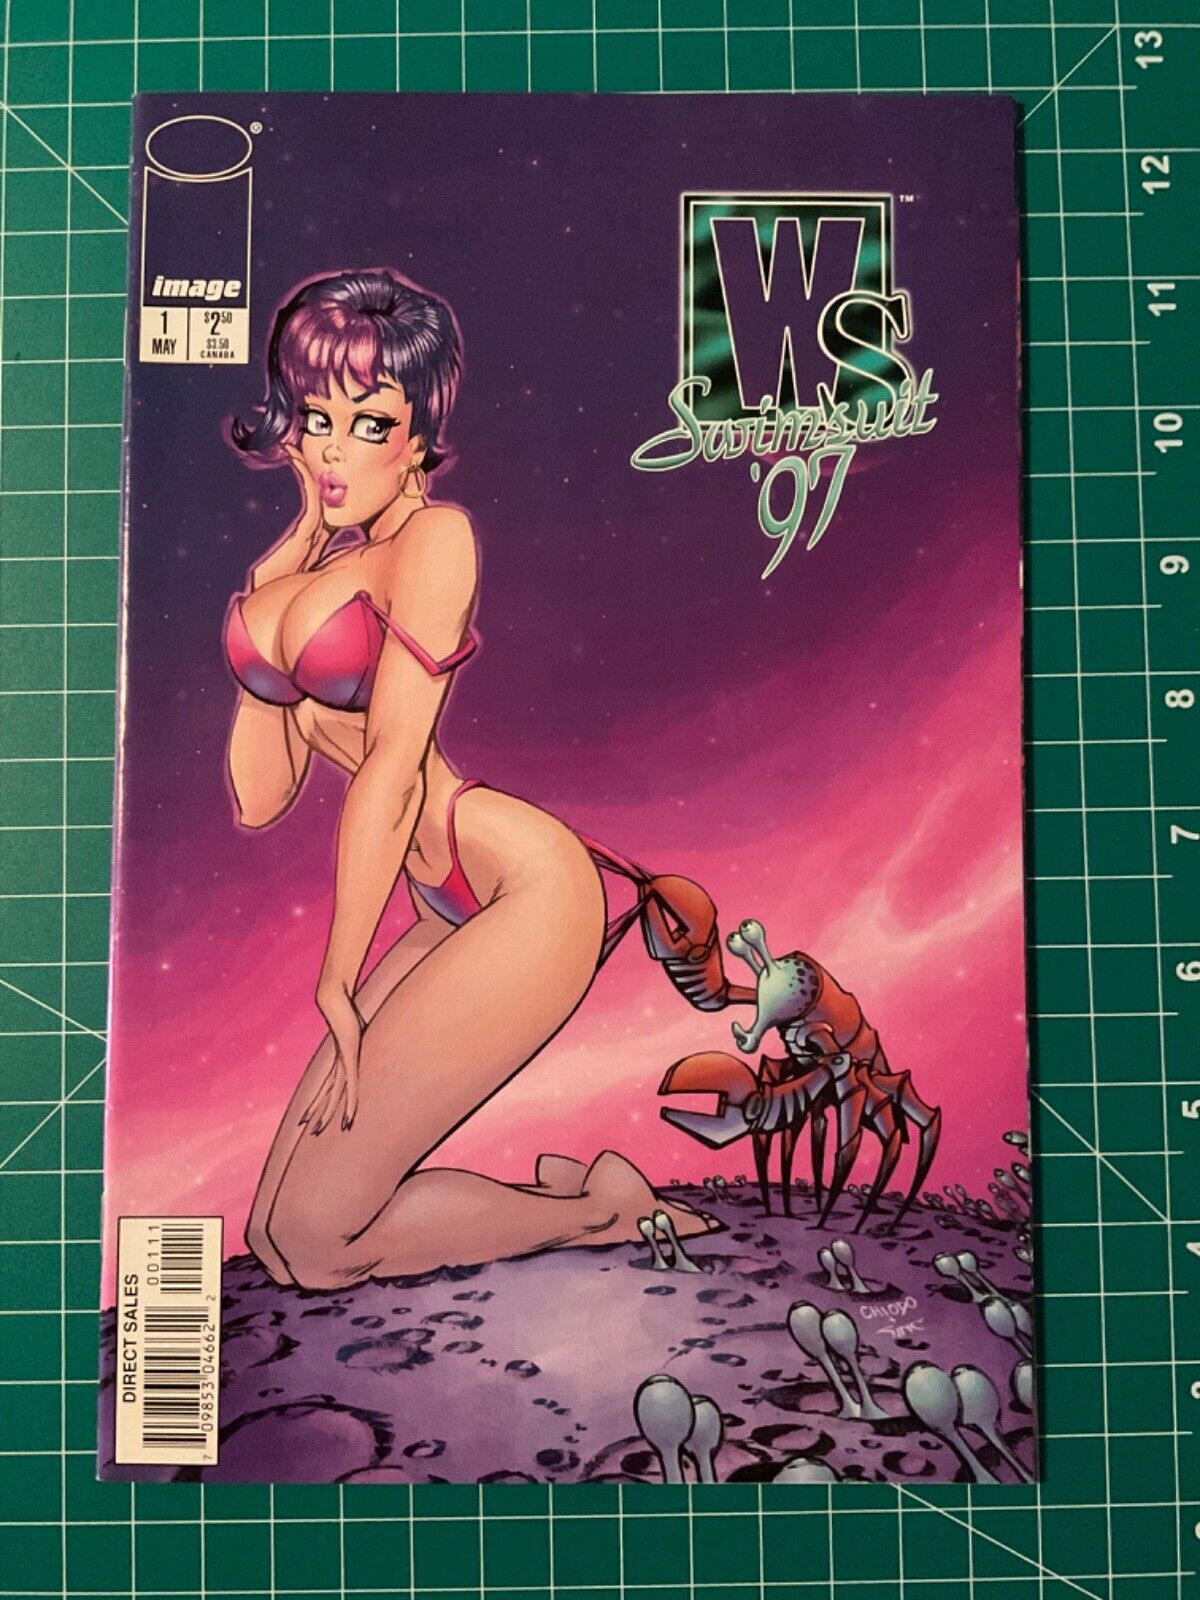 Wildstorm/Image Comics WS Swimsuit Special '97 Comic Book Issue #1 (1997)